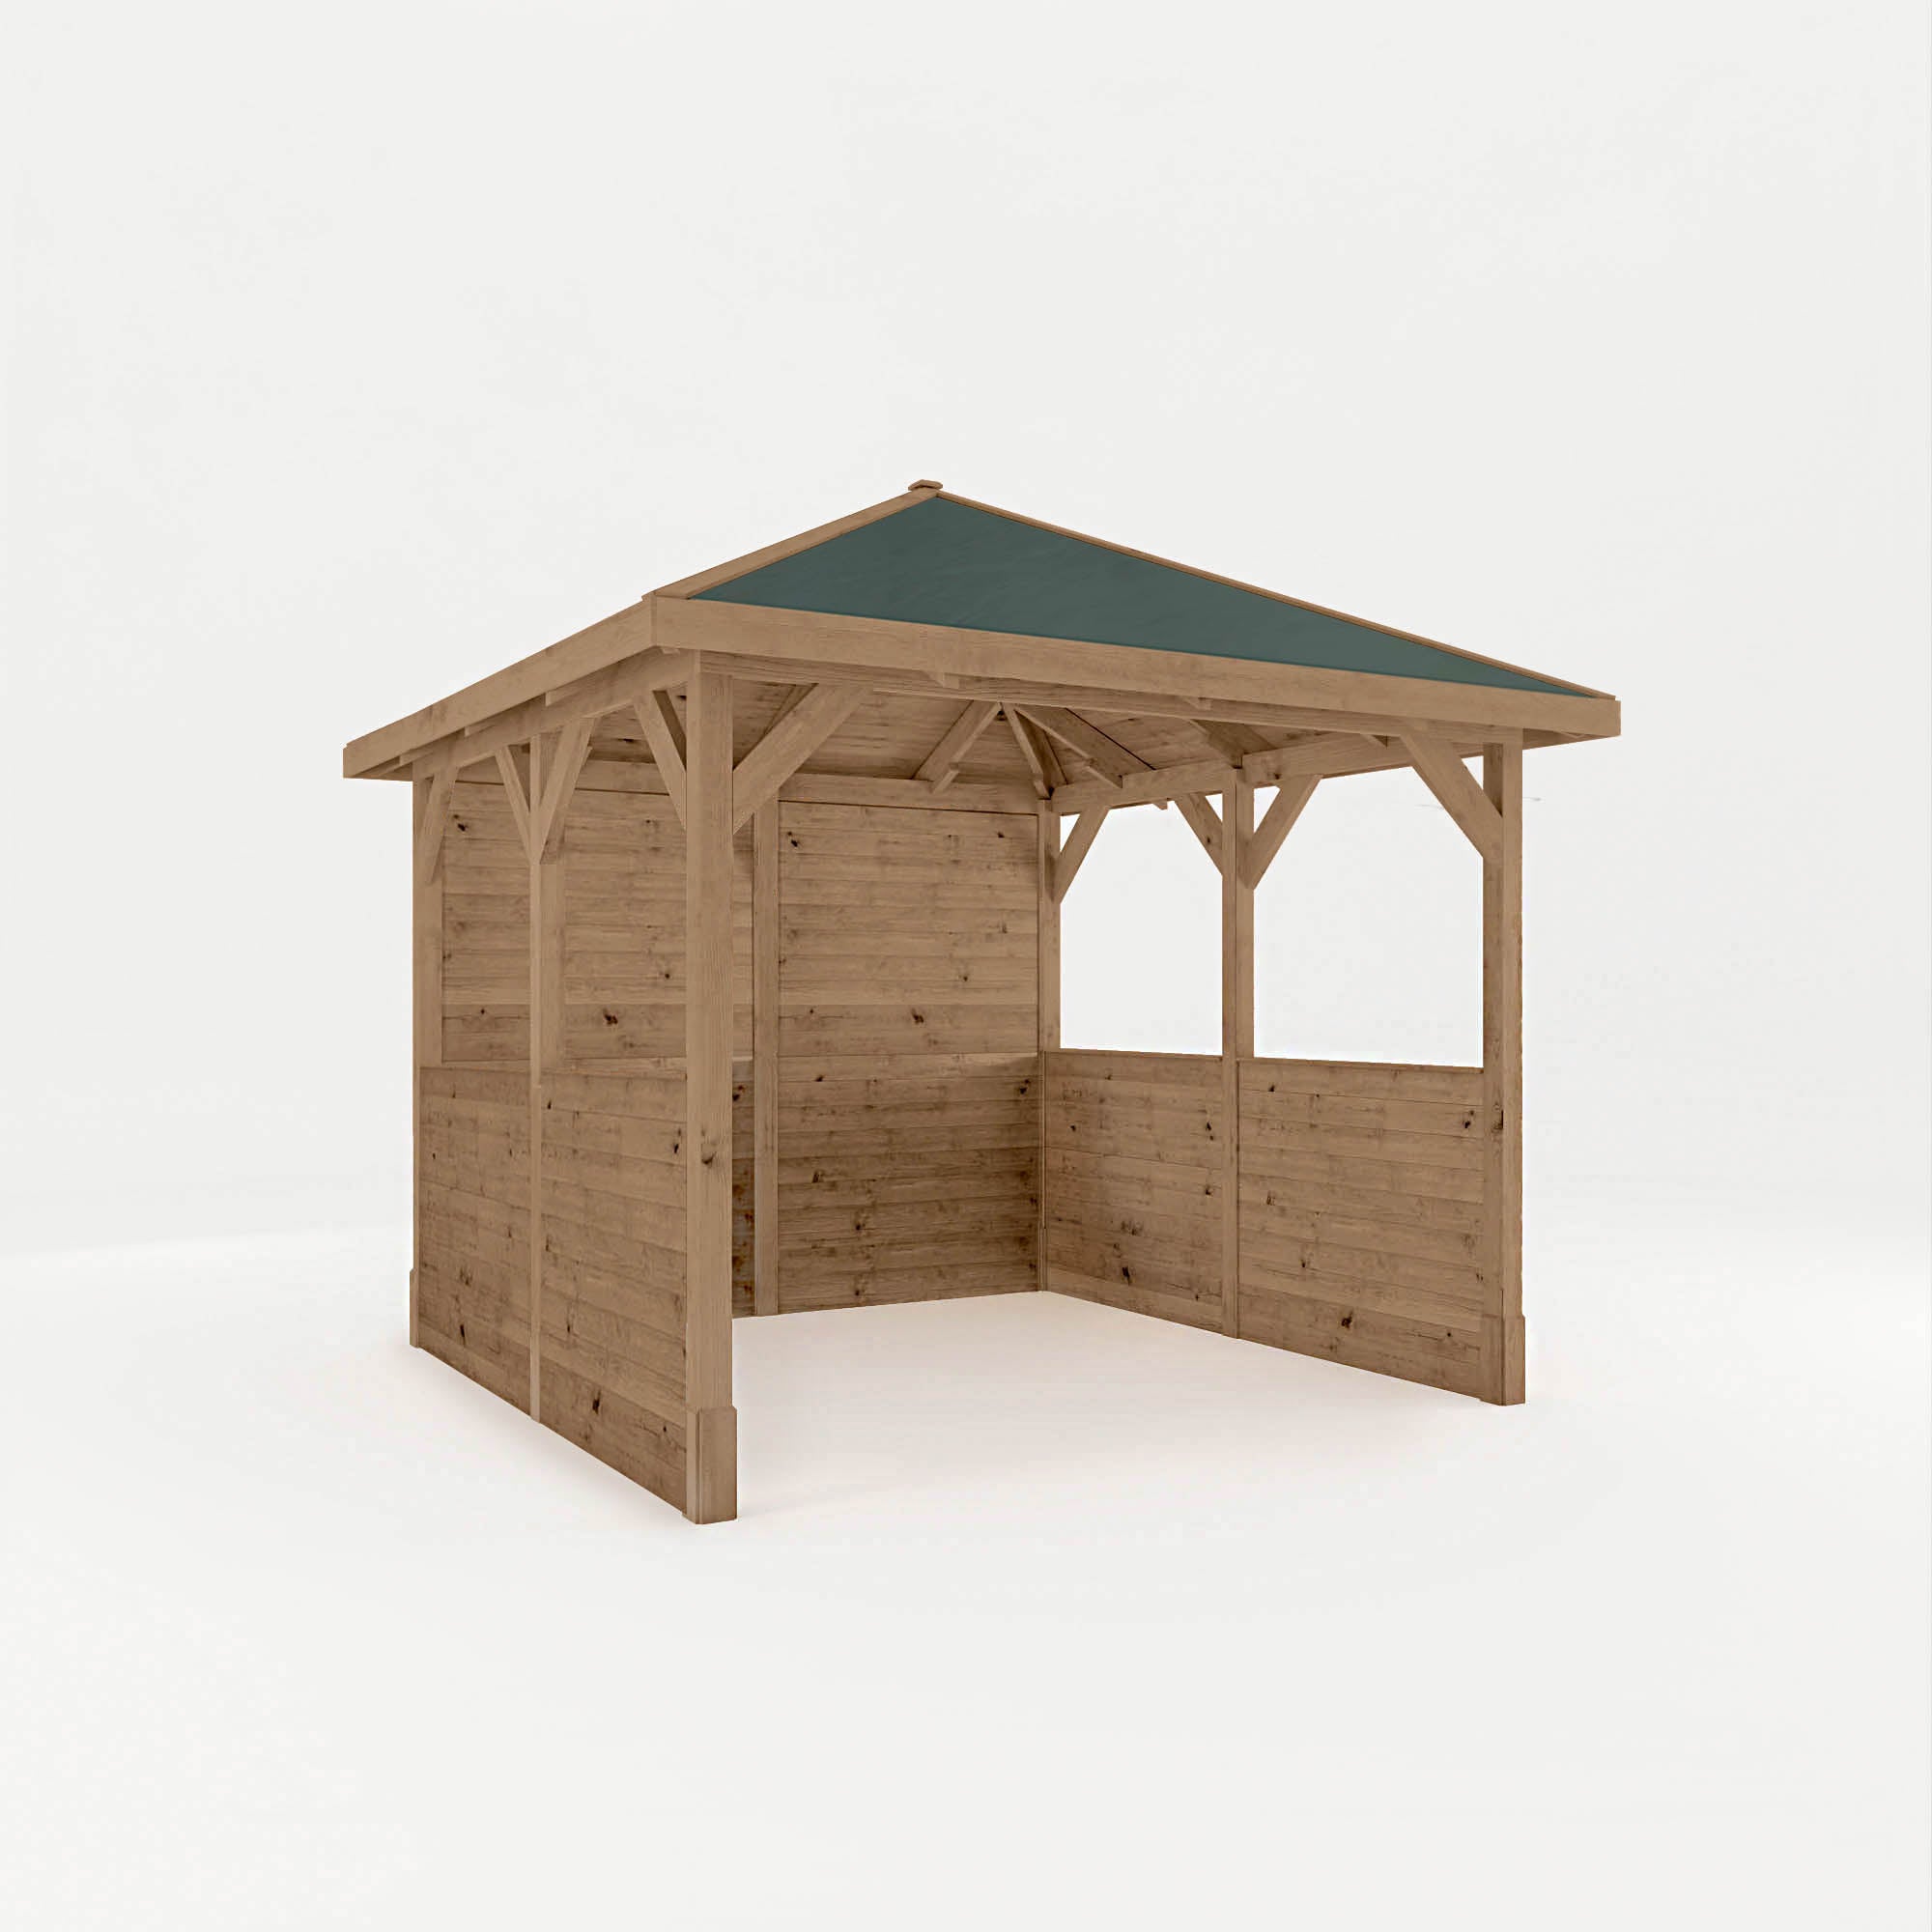 3m x 3m Pressure Treated Gazebo with Roof and Boarded Panels